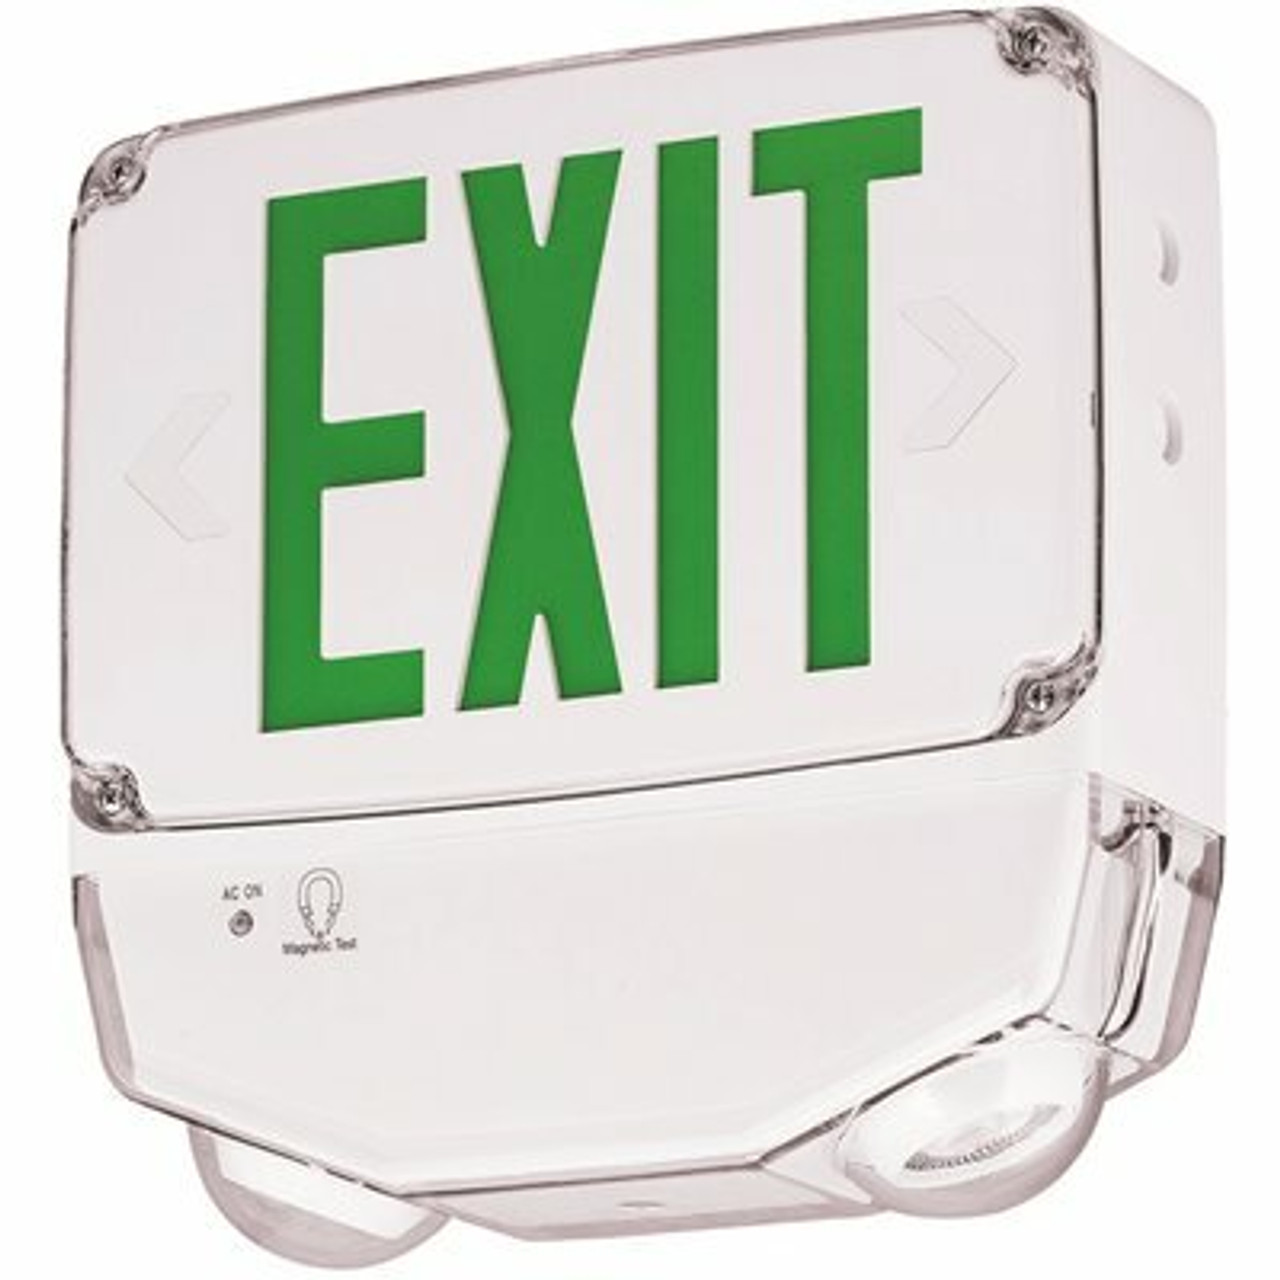 Hubbell Lighting Tradeselect 5.2-Watt 6-Volt Dc White Integrated Led Exit/Emergency Combination Light Wet Location - 3580309